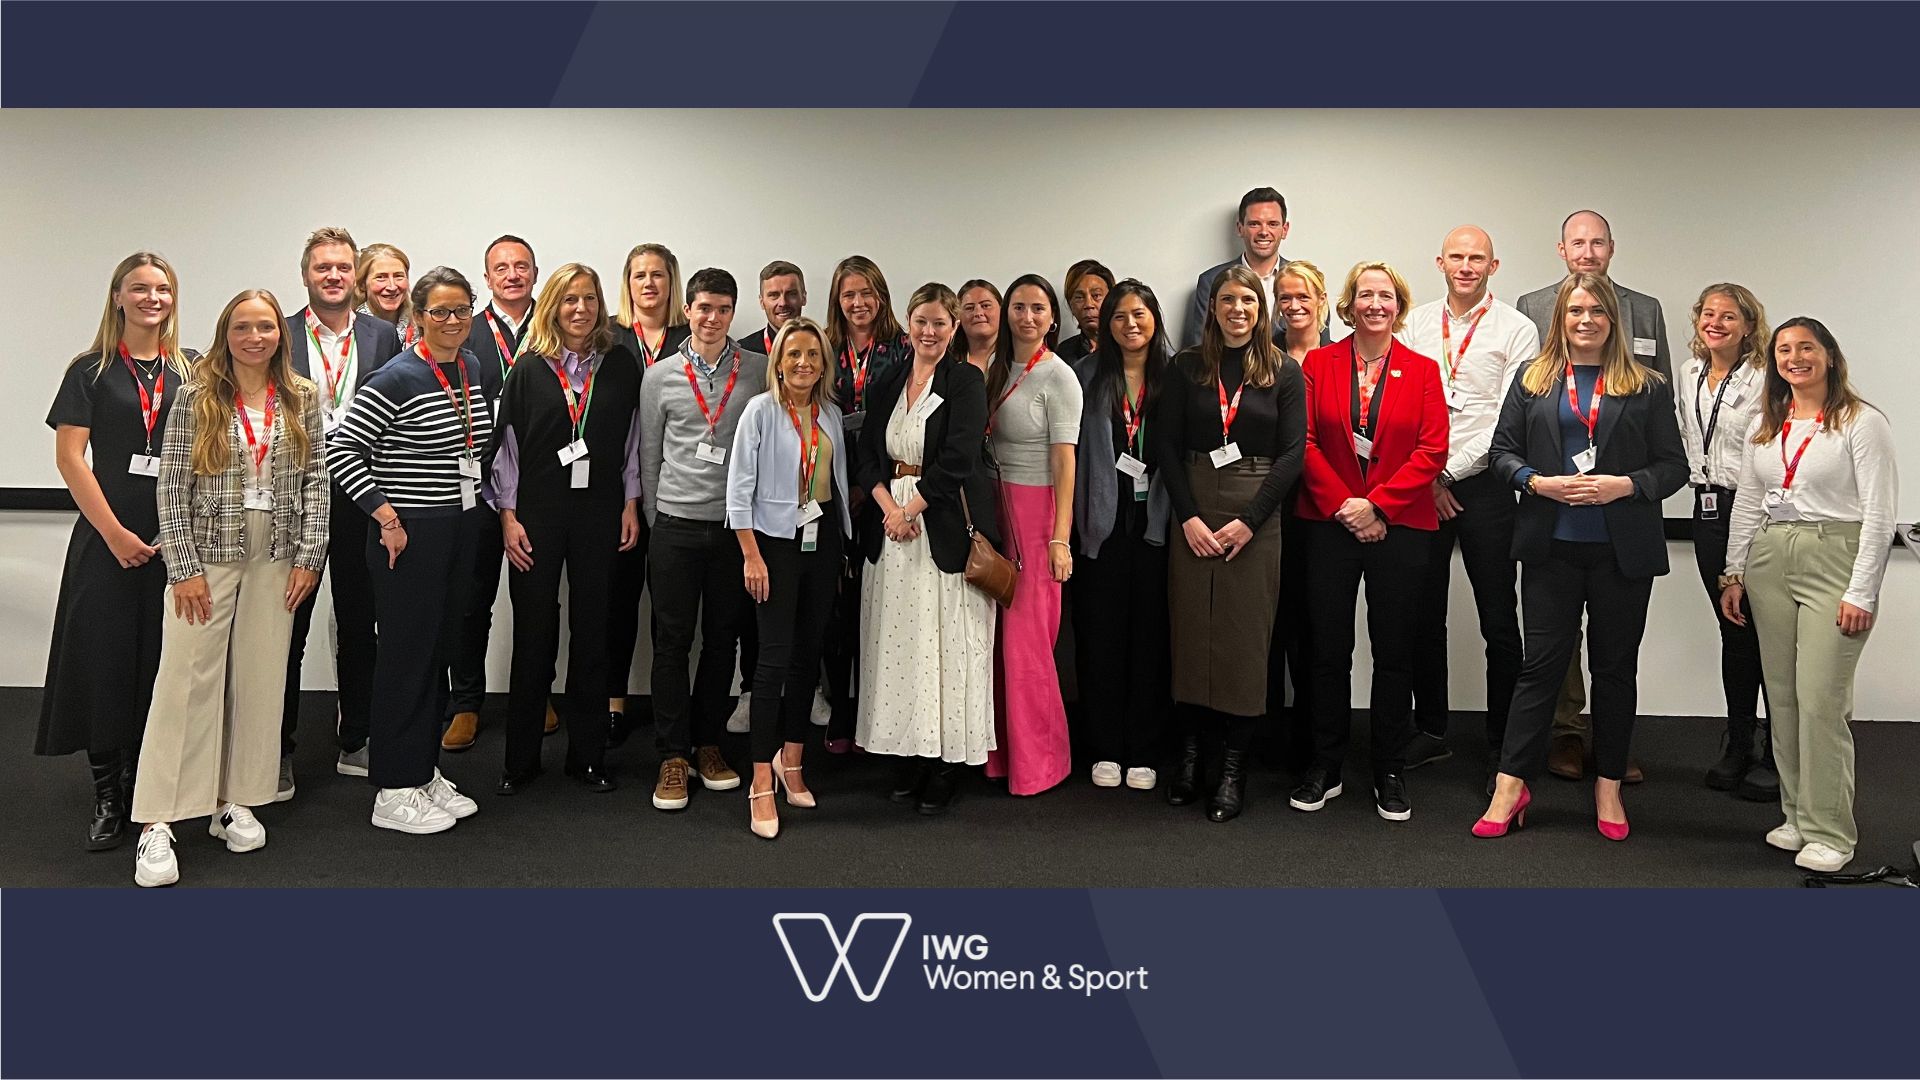 Group photograph of the current participants in the UK Department for Business and Trade's Women's Sports Investment Accelerator Programme